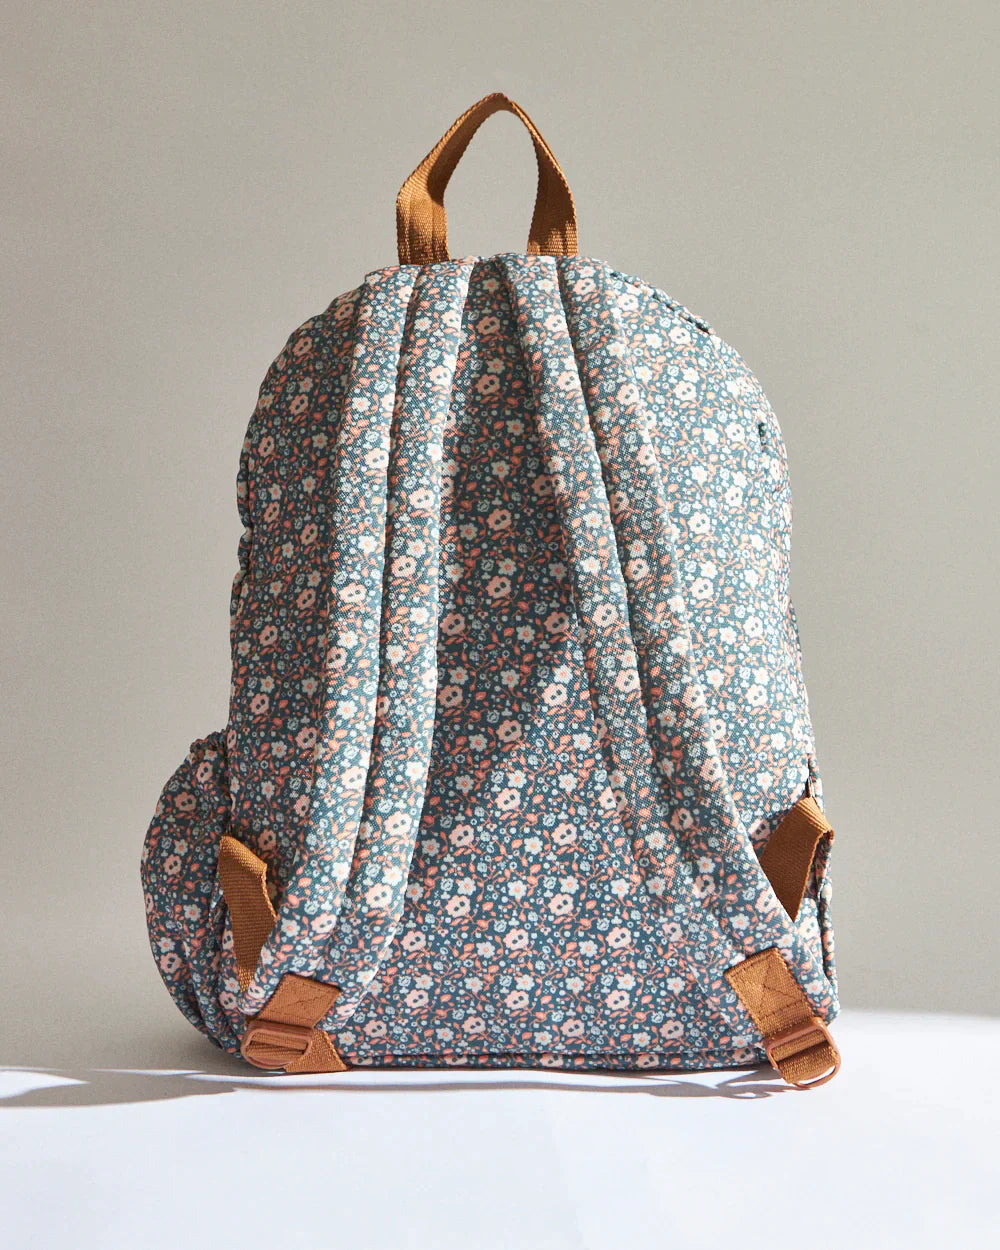 Teal By Chumbak Floral Beds Laptop Backpack - Chumbak